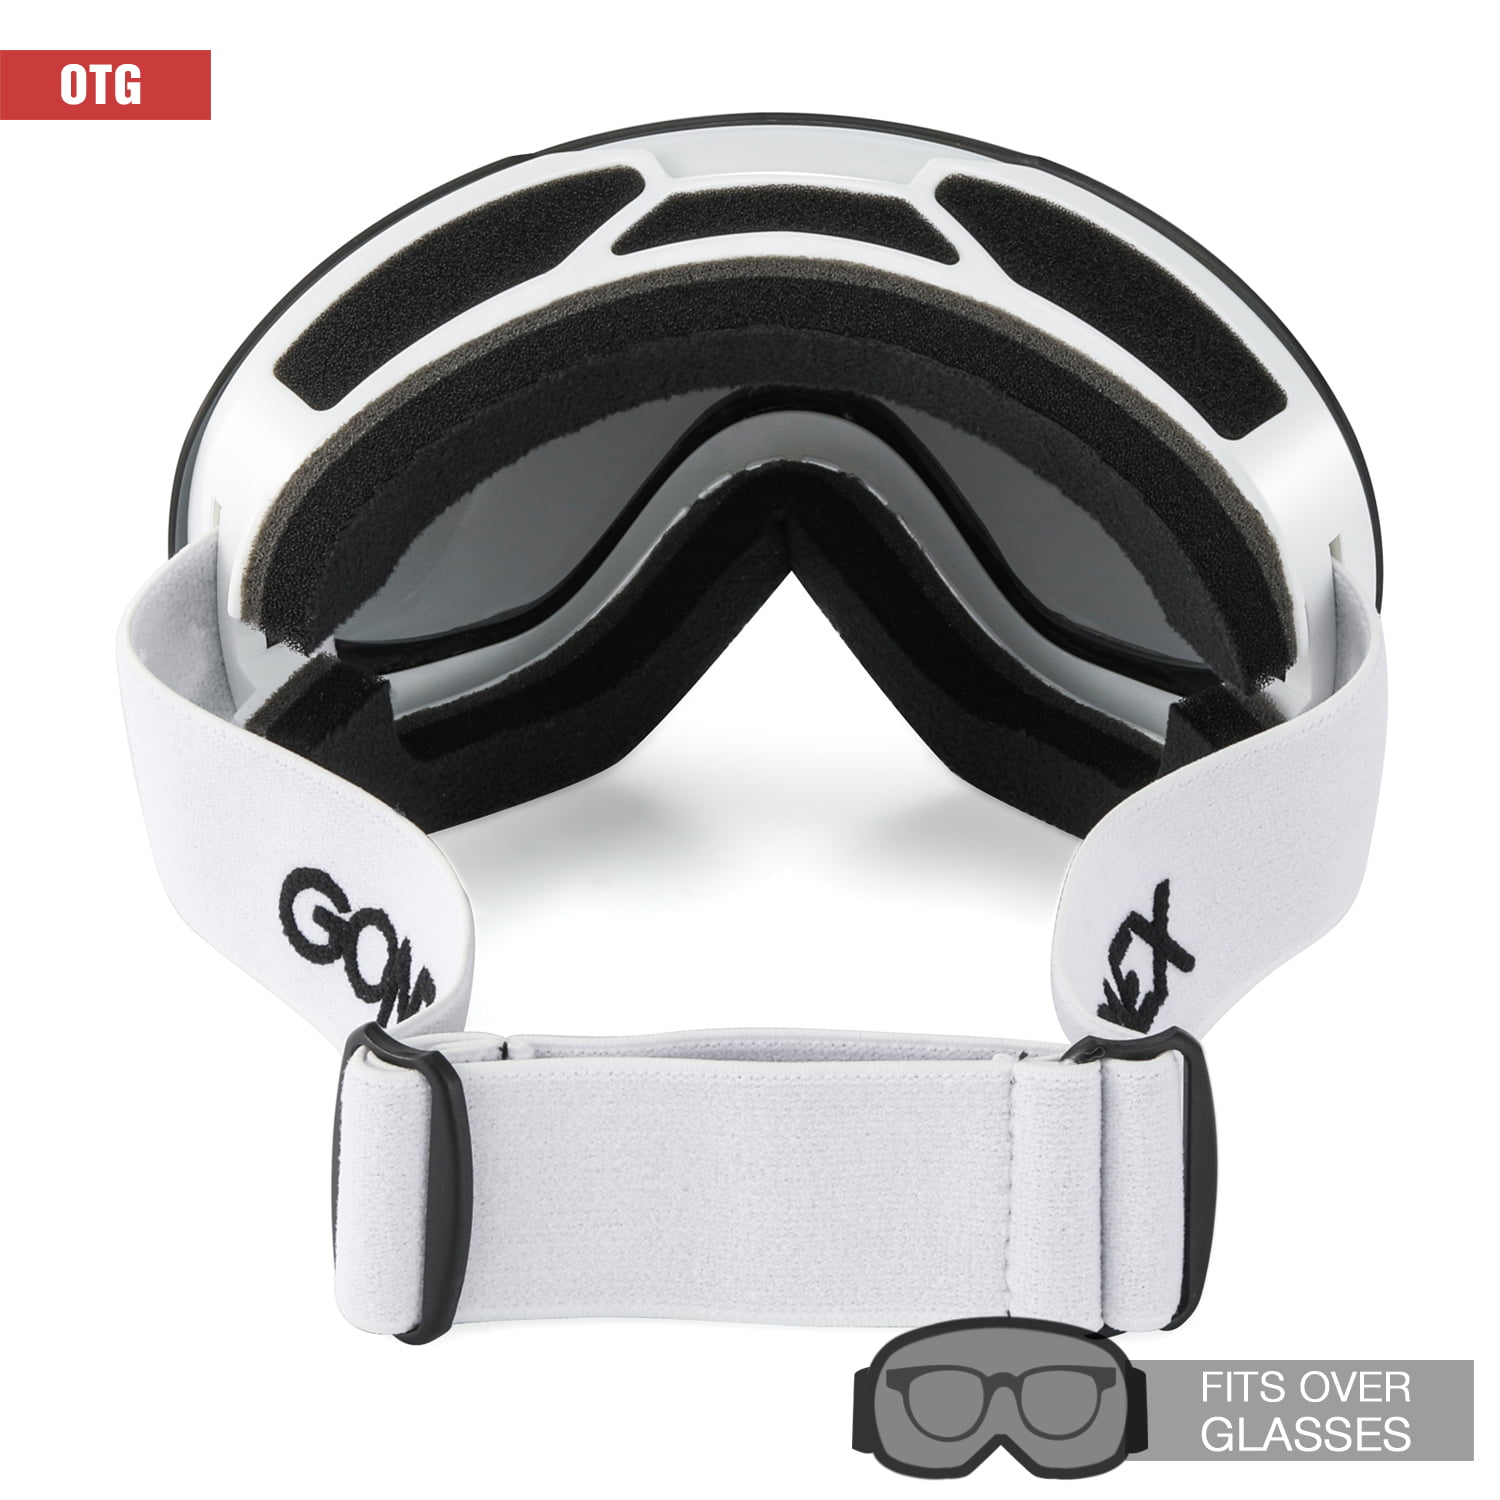 Details about   Gonex Snow Goggles Professional Ski OTG Anti-Fog Windproof UV Protection w/ Case 